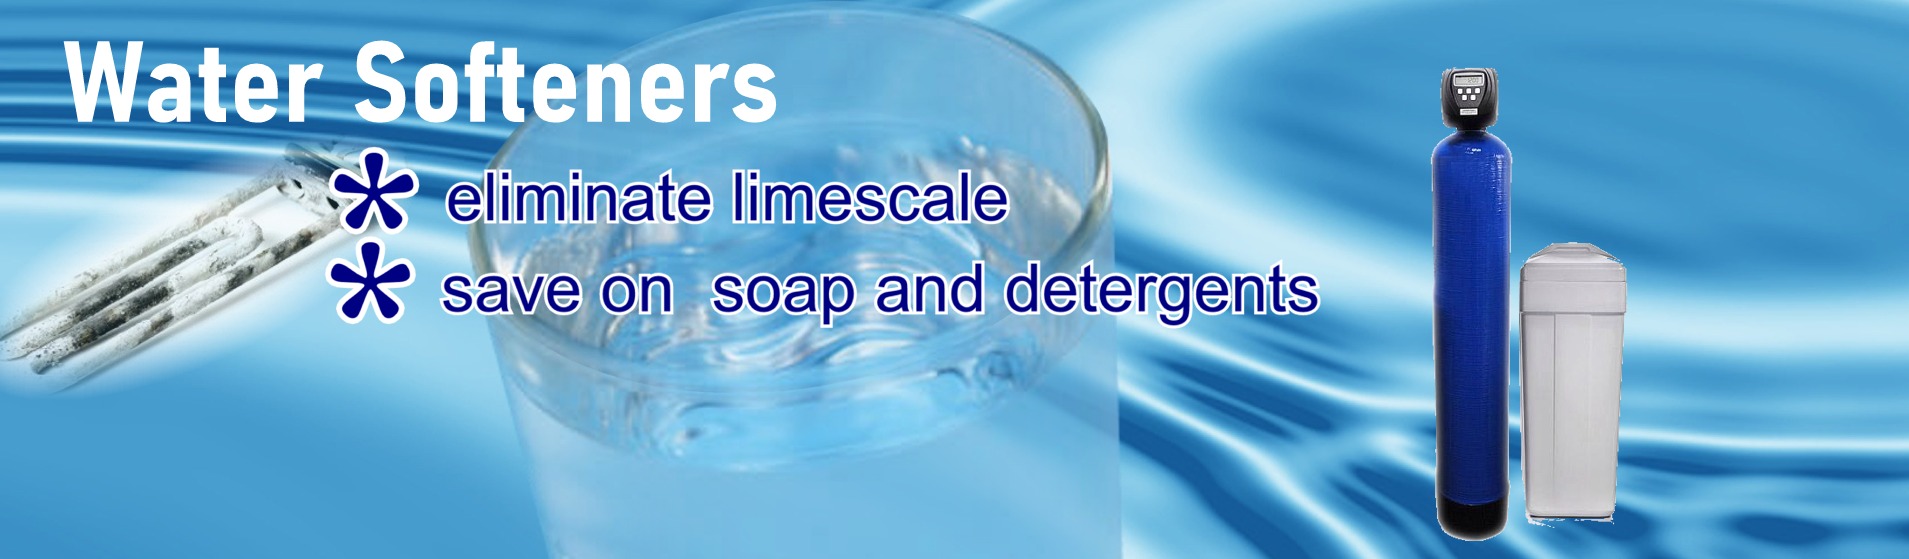 Water softeners - eliminate limescale, save on soap and detergents - Direct Water Treatment, Co. Kilkenny, Ireland